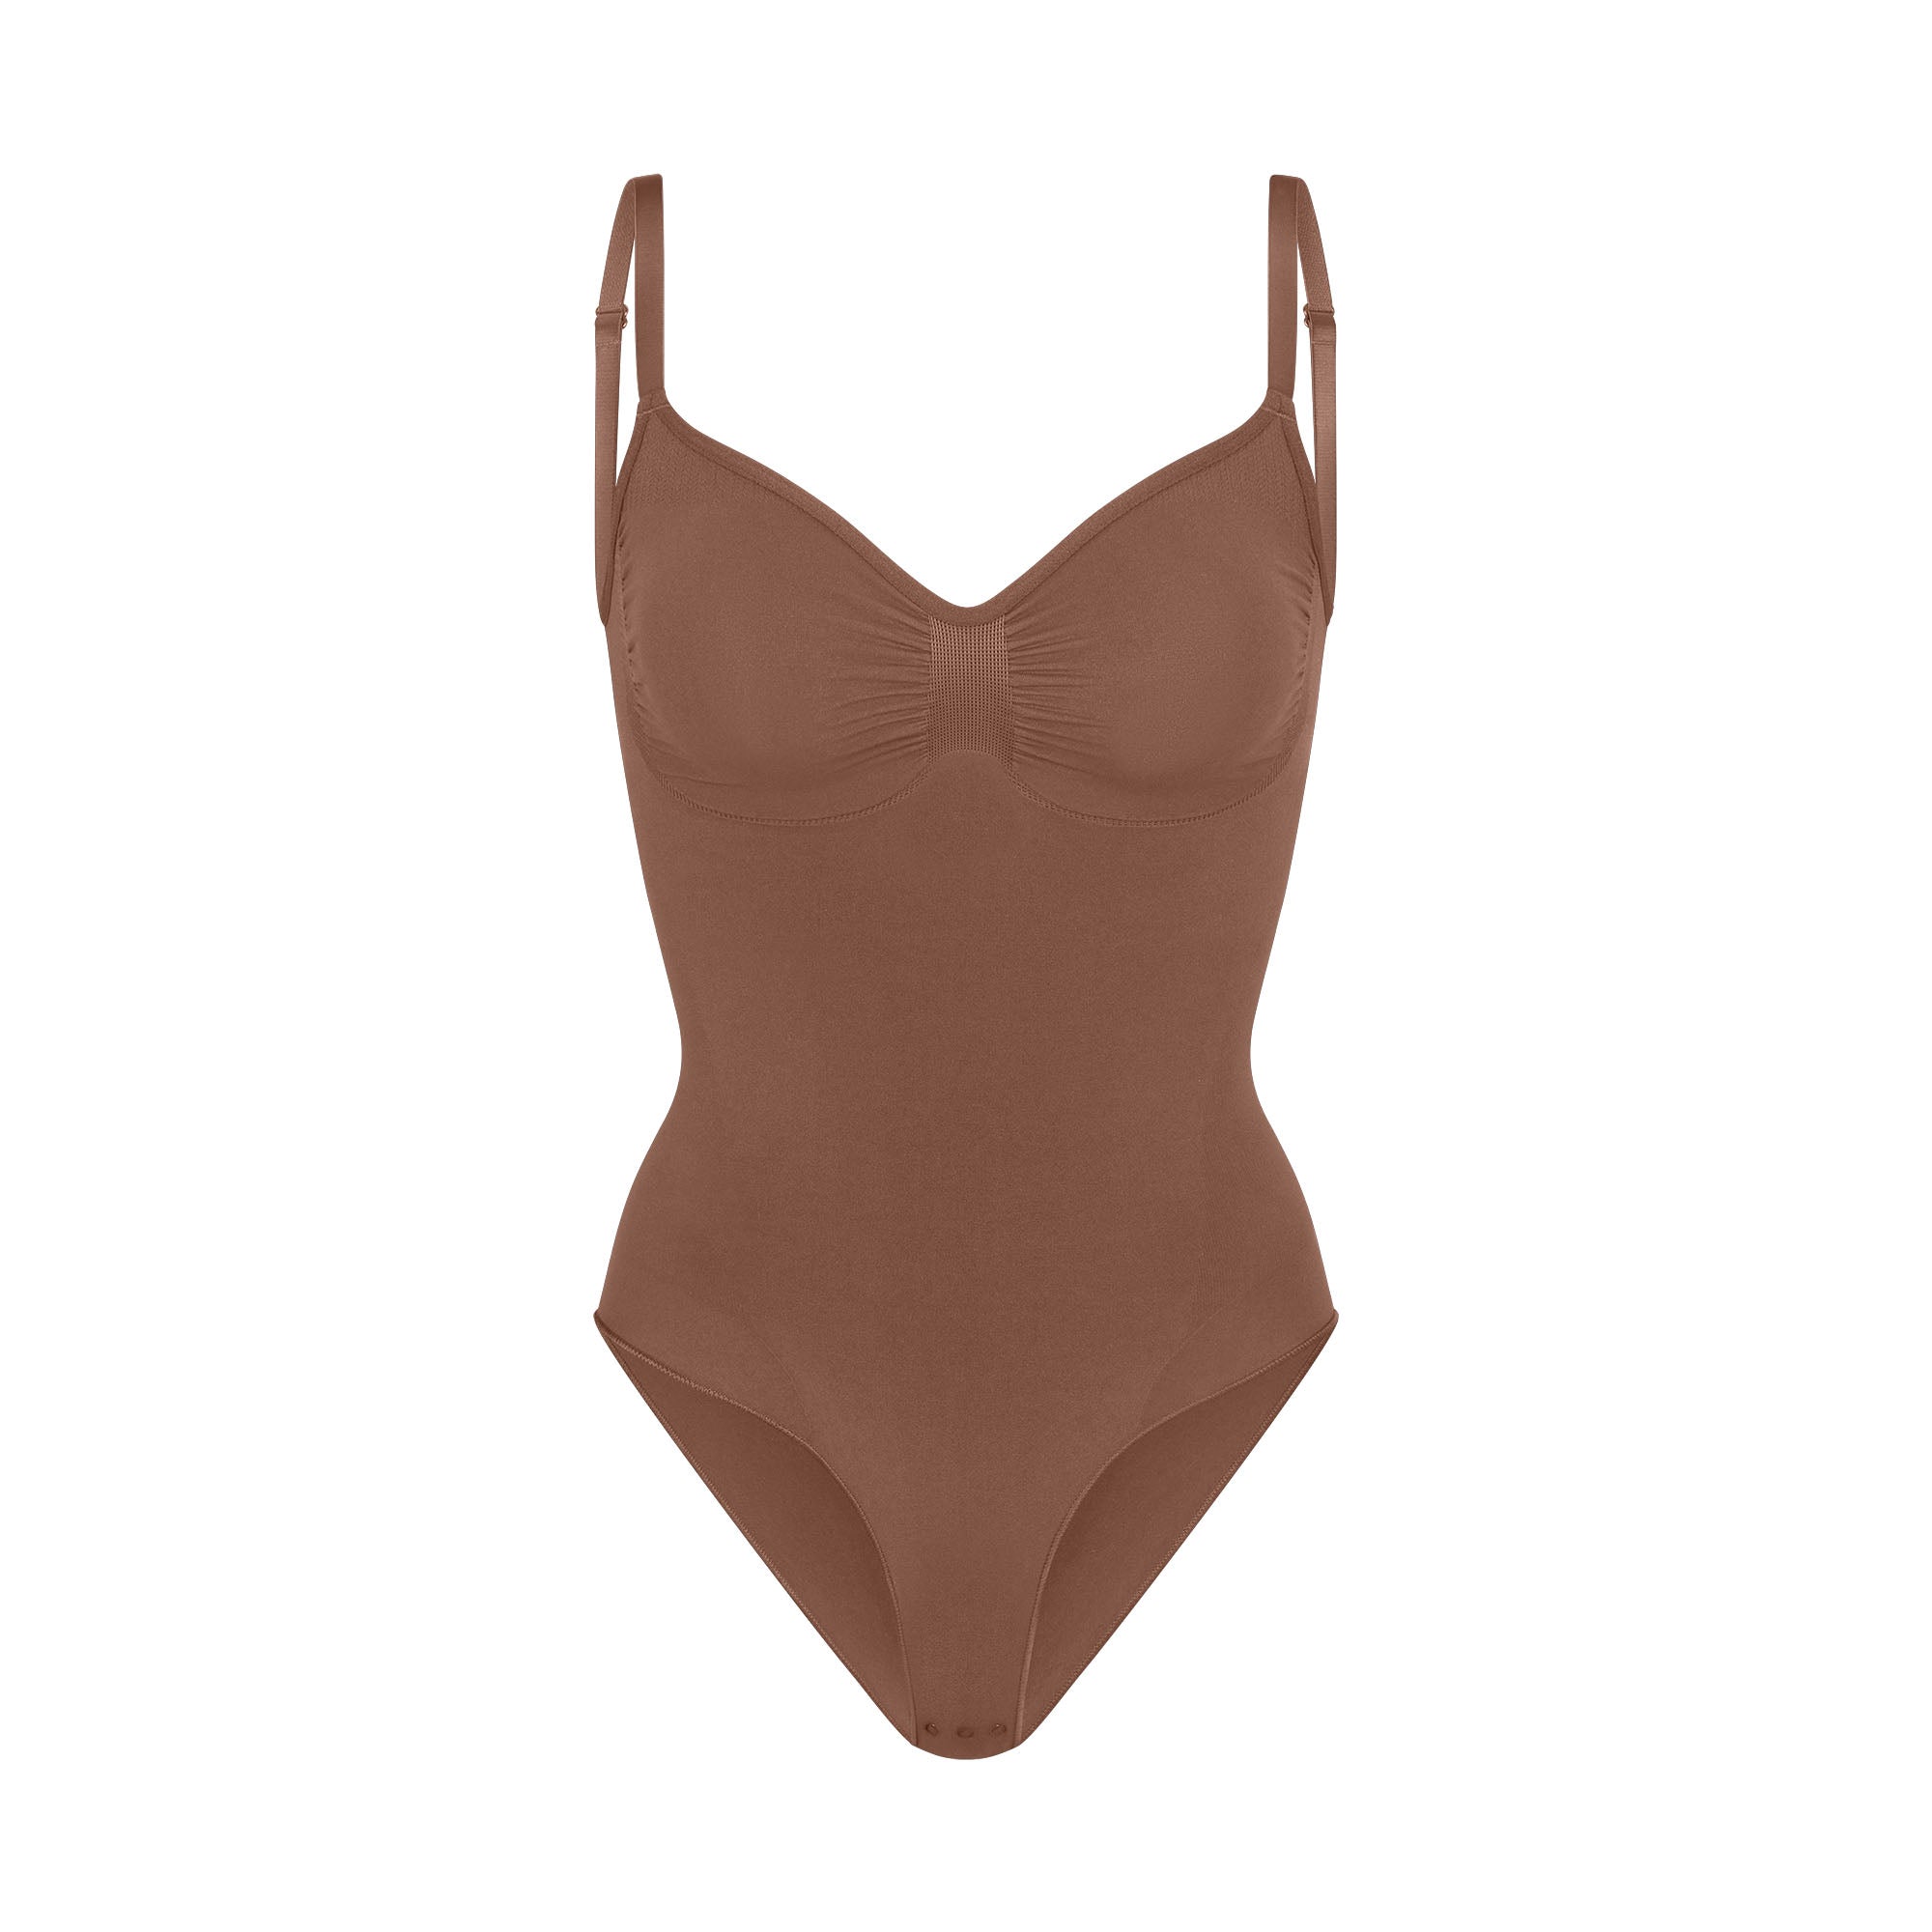 Replying to @ratattouri SKIMS sculpting bodysuit try on! Size 8-10